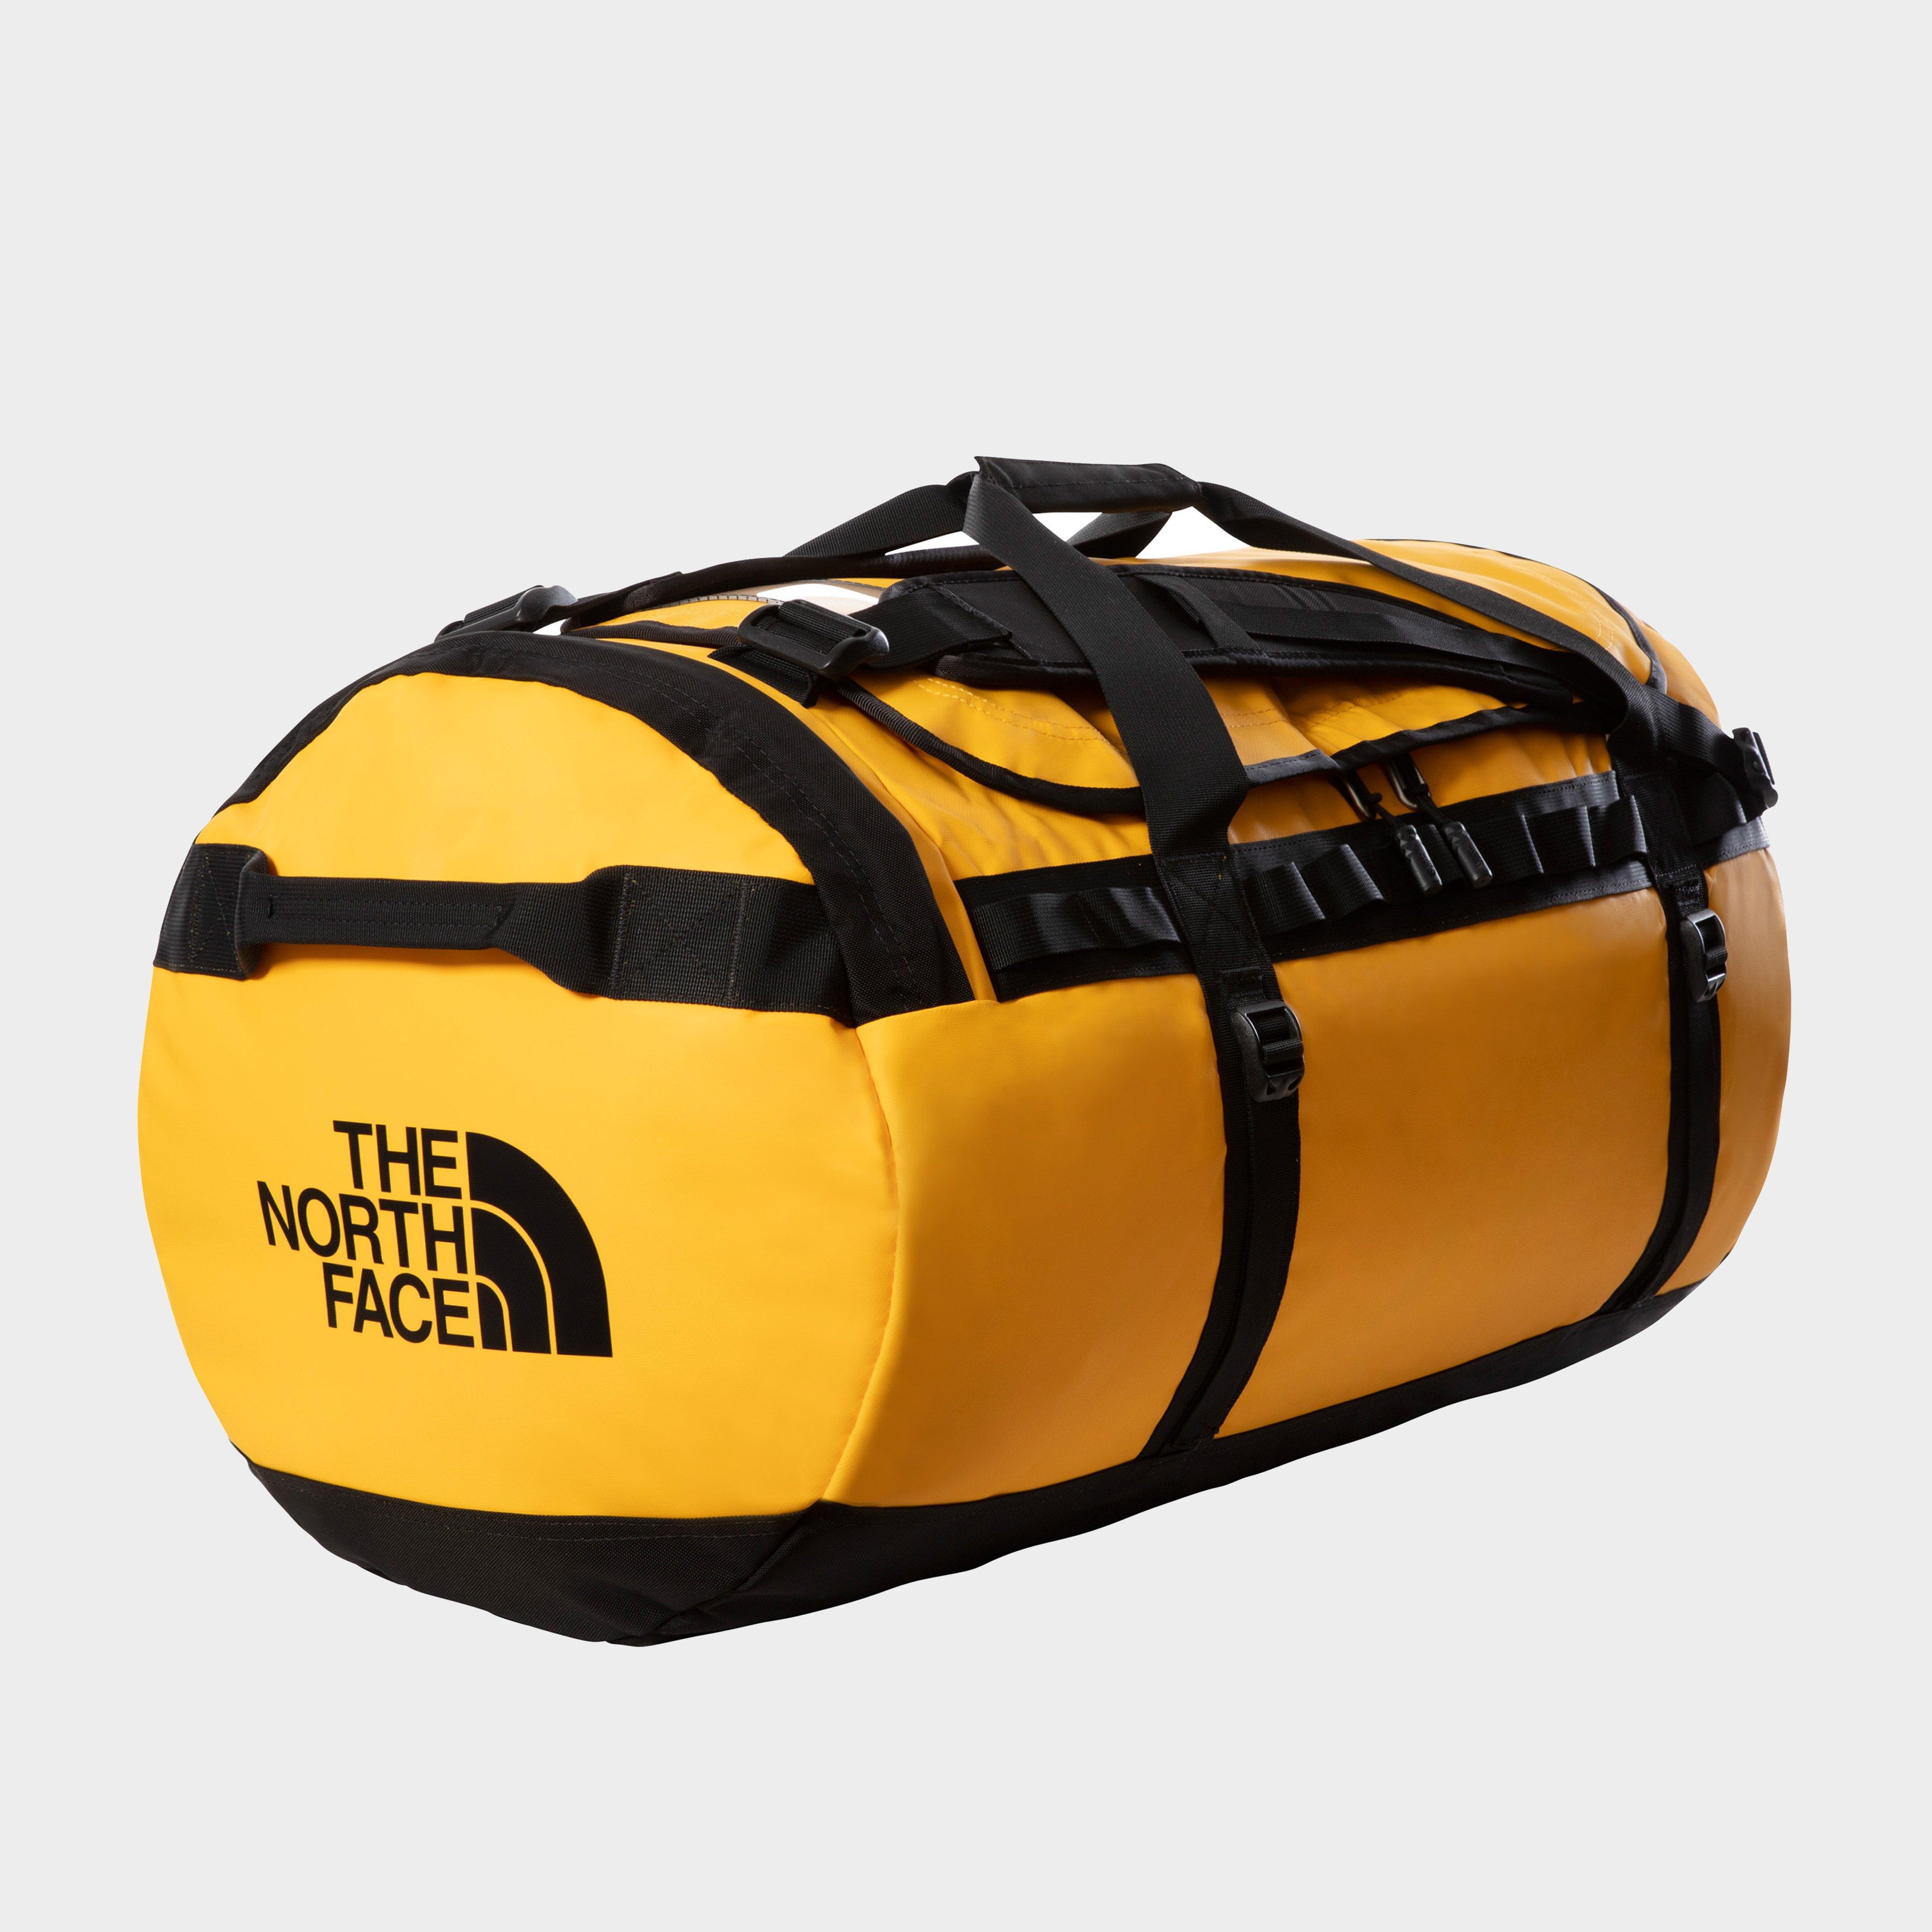  The North Face Base Camp Duffel Bag (Large)